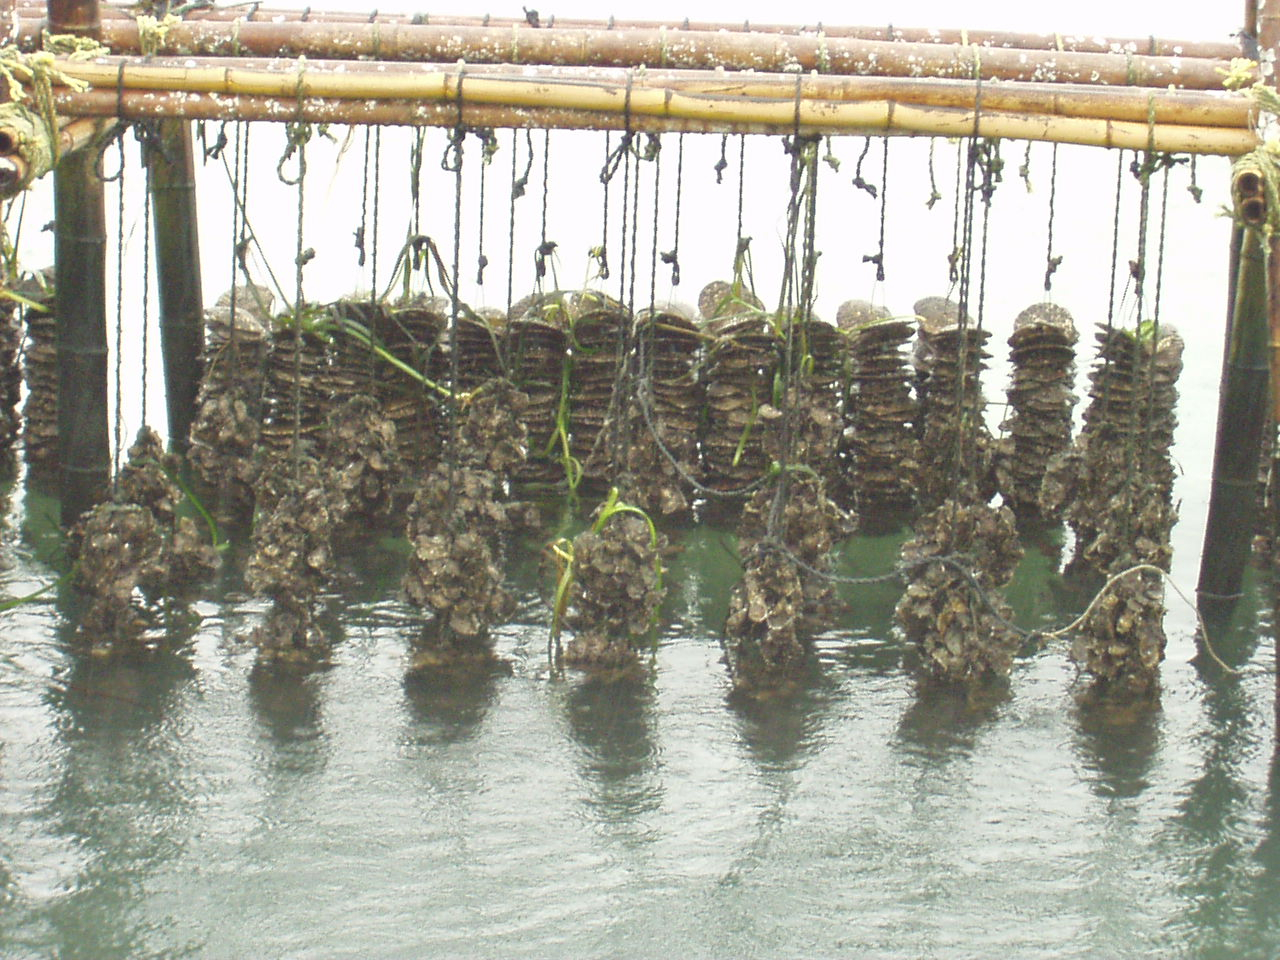 Long-line oyster culture with larger oysters on the front lines and juvenilespat on scallop shells in the background